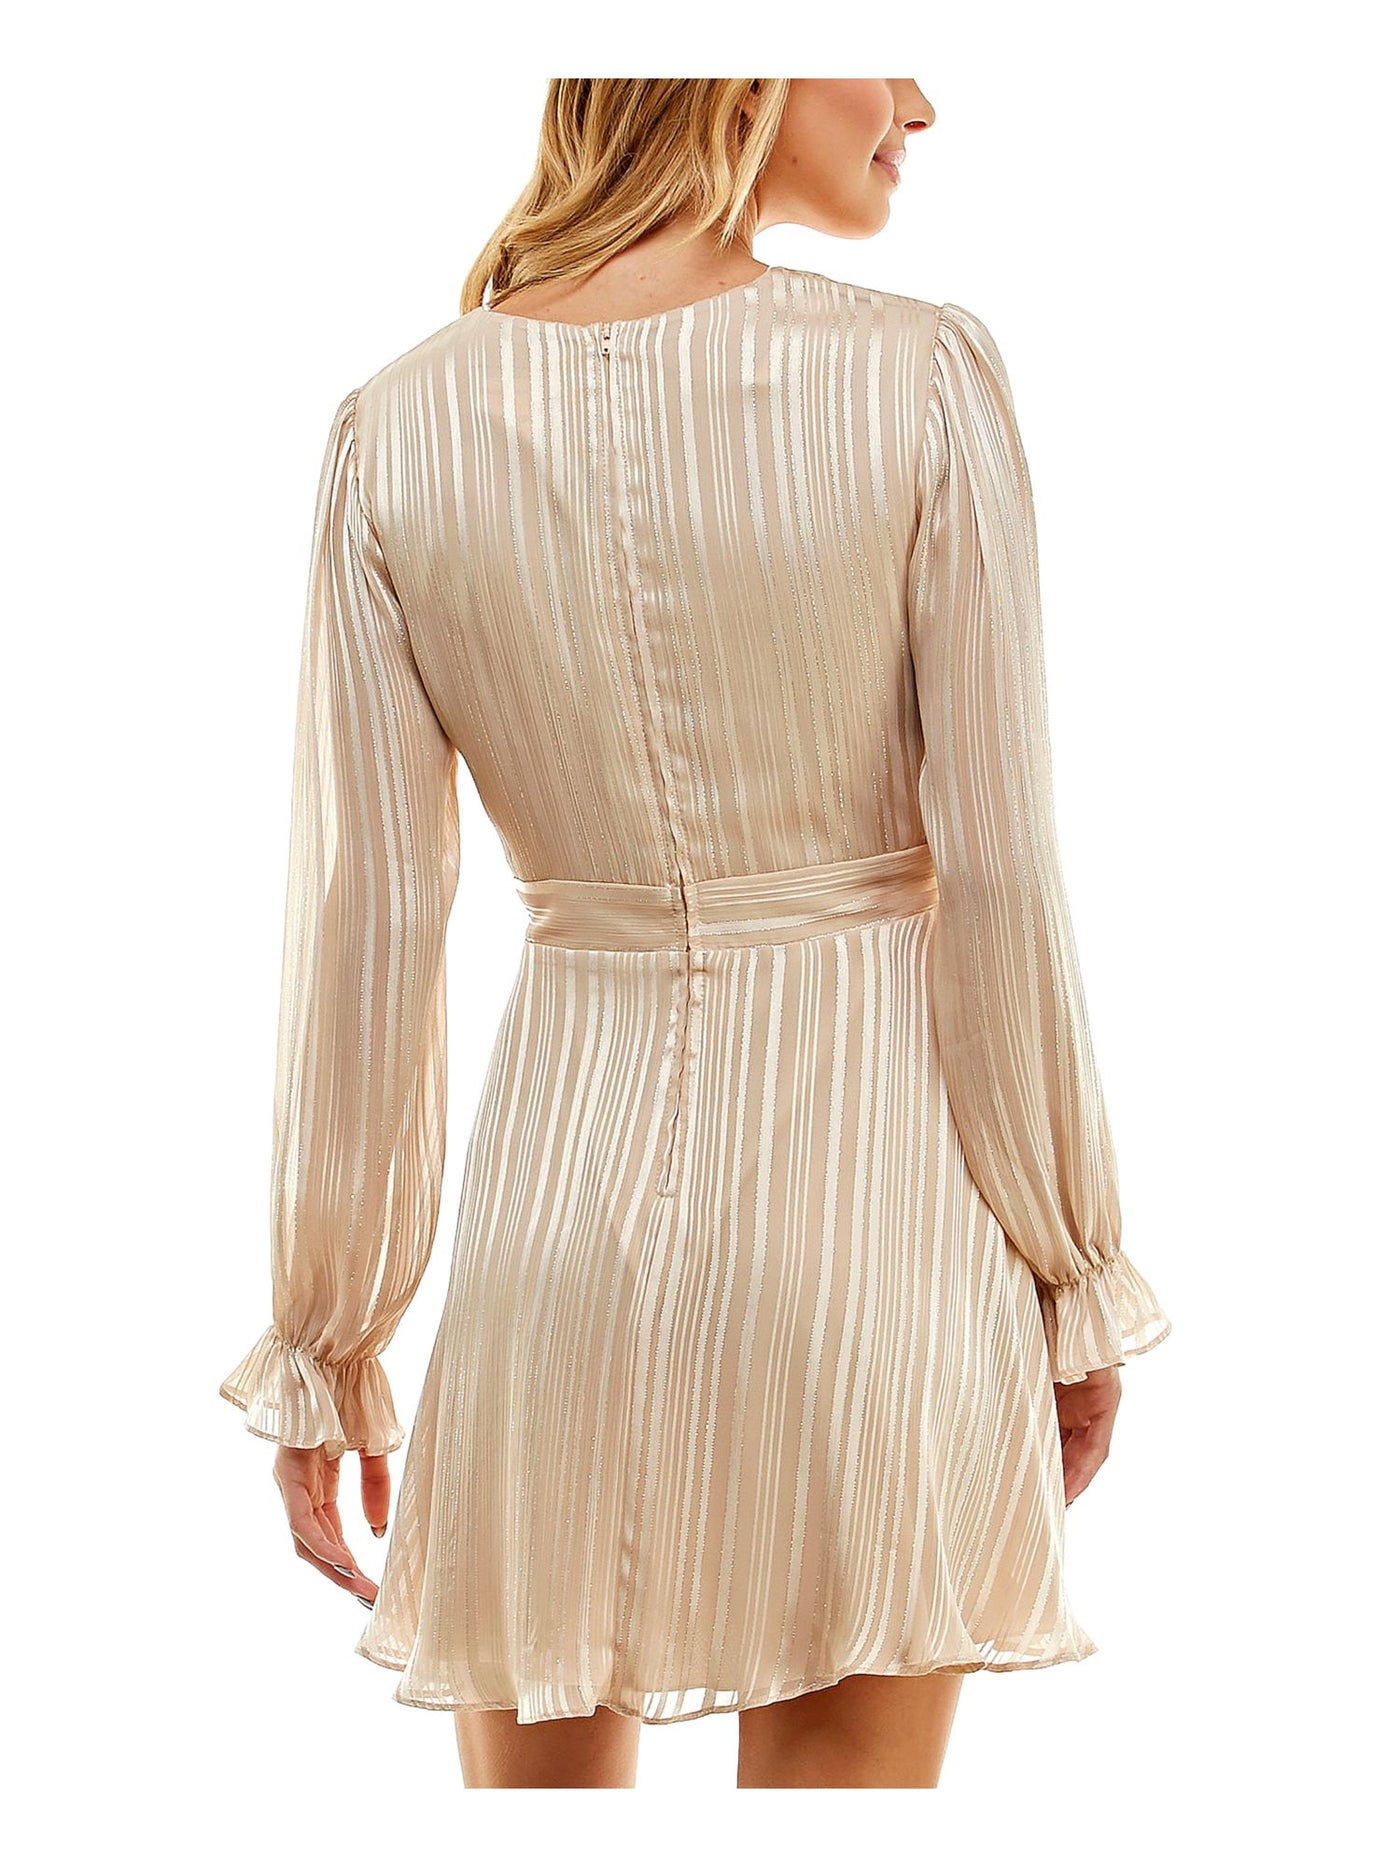 B DARLIN Womens Beige Zippered Lined Striped Long Sleeve Surplice Neckline Above The Knee Party Fit + Flare Dress Juniors 5\6